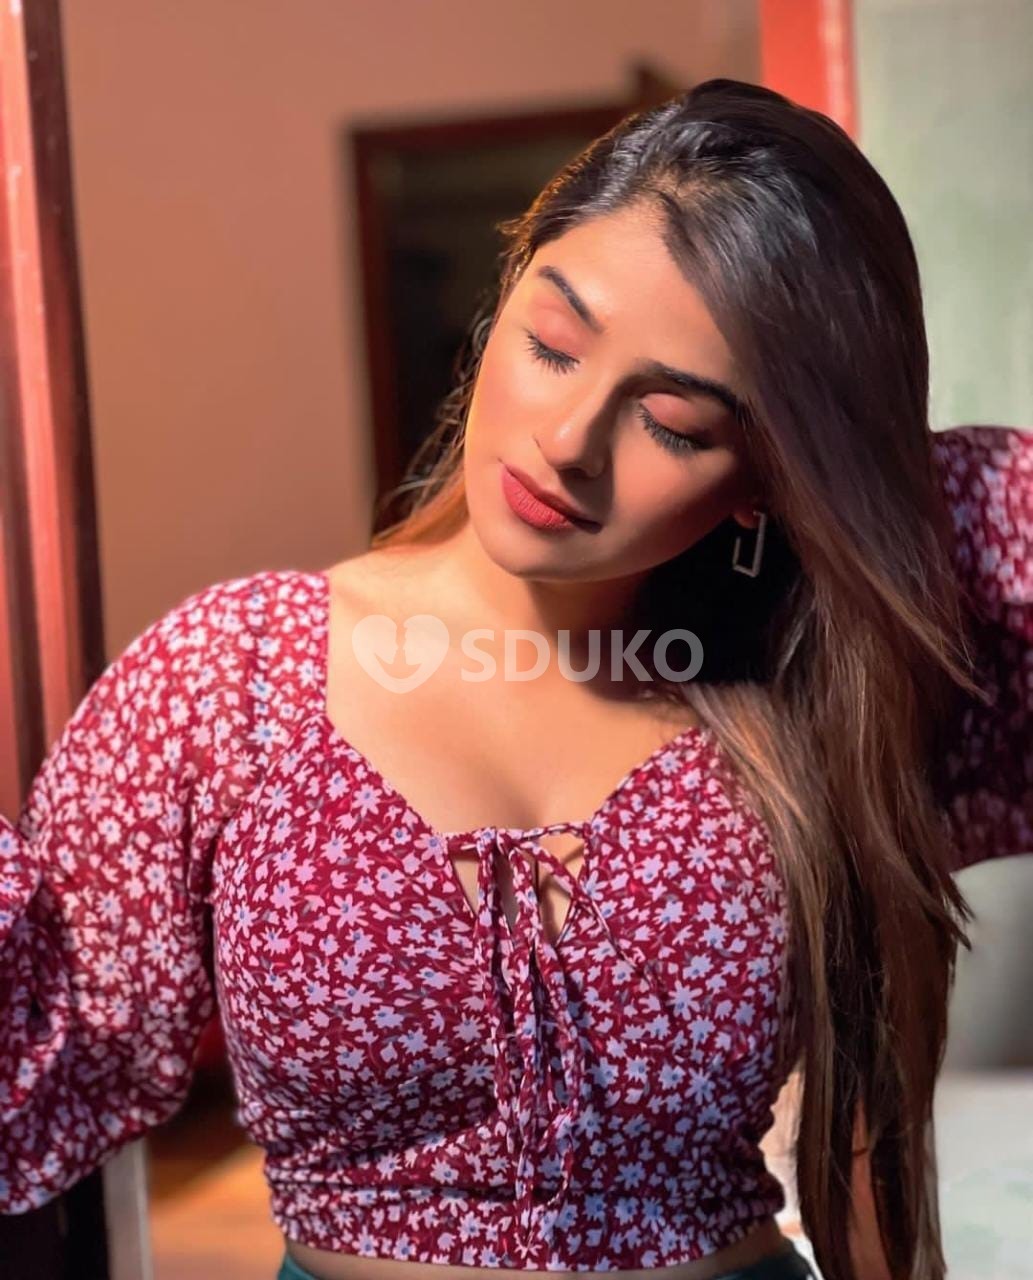 MY SELF KAVYA SHARMA⭐⭐💋🌟🌟 BEST INDEPENDENT CALL GIRLS SERVICE AVAILABLE GENUINE SERVICE